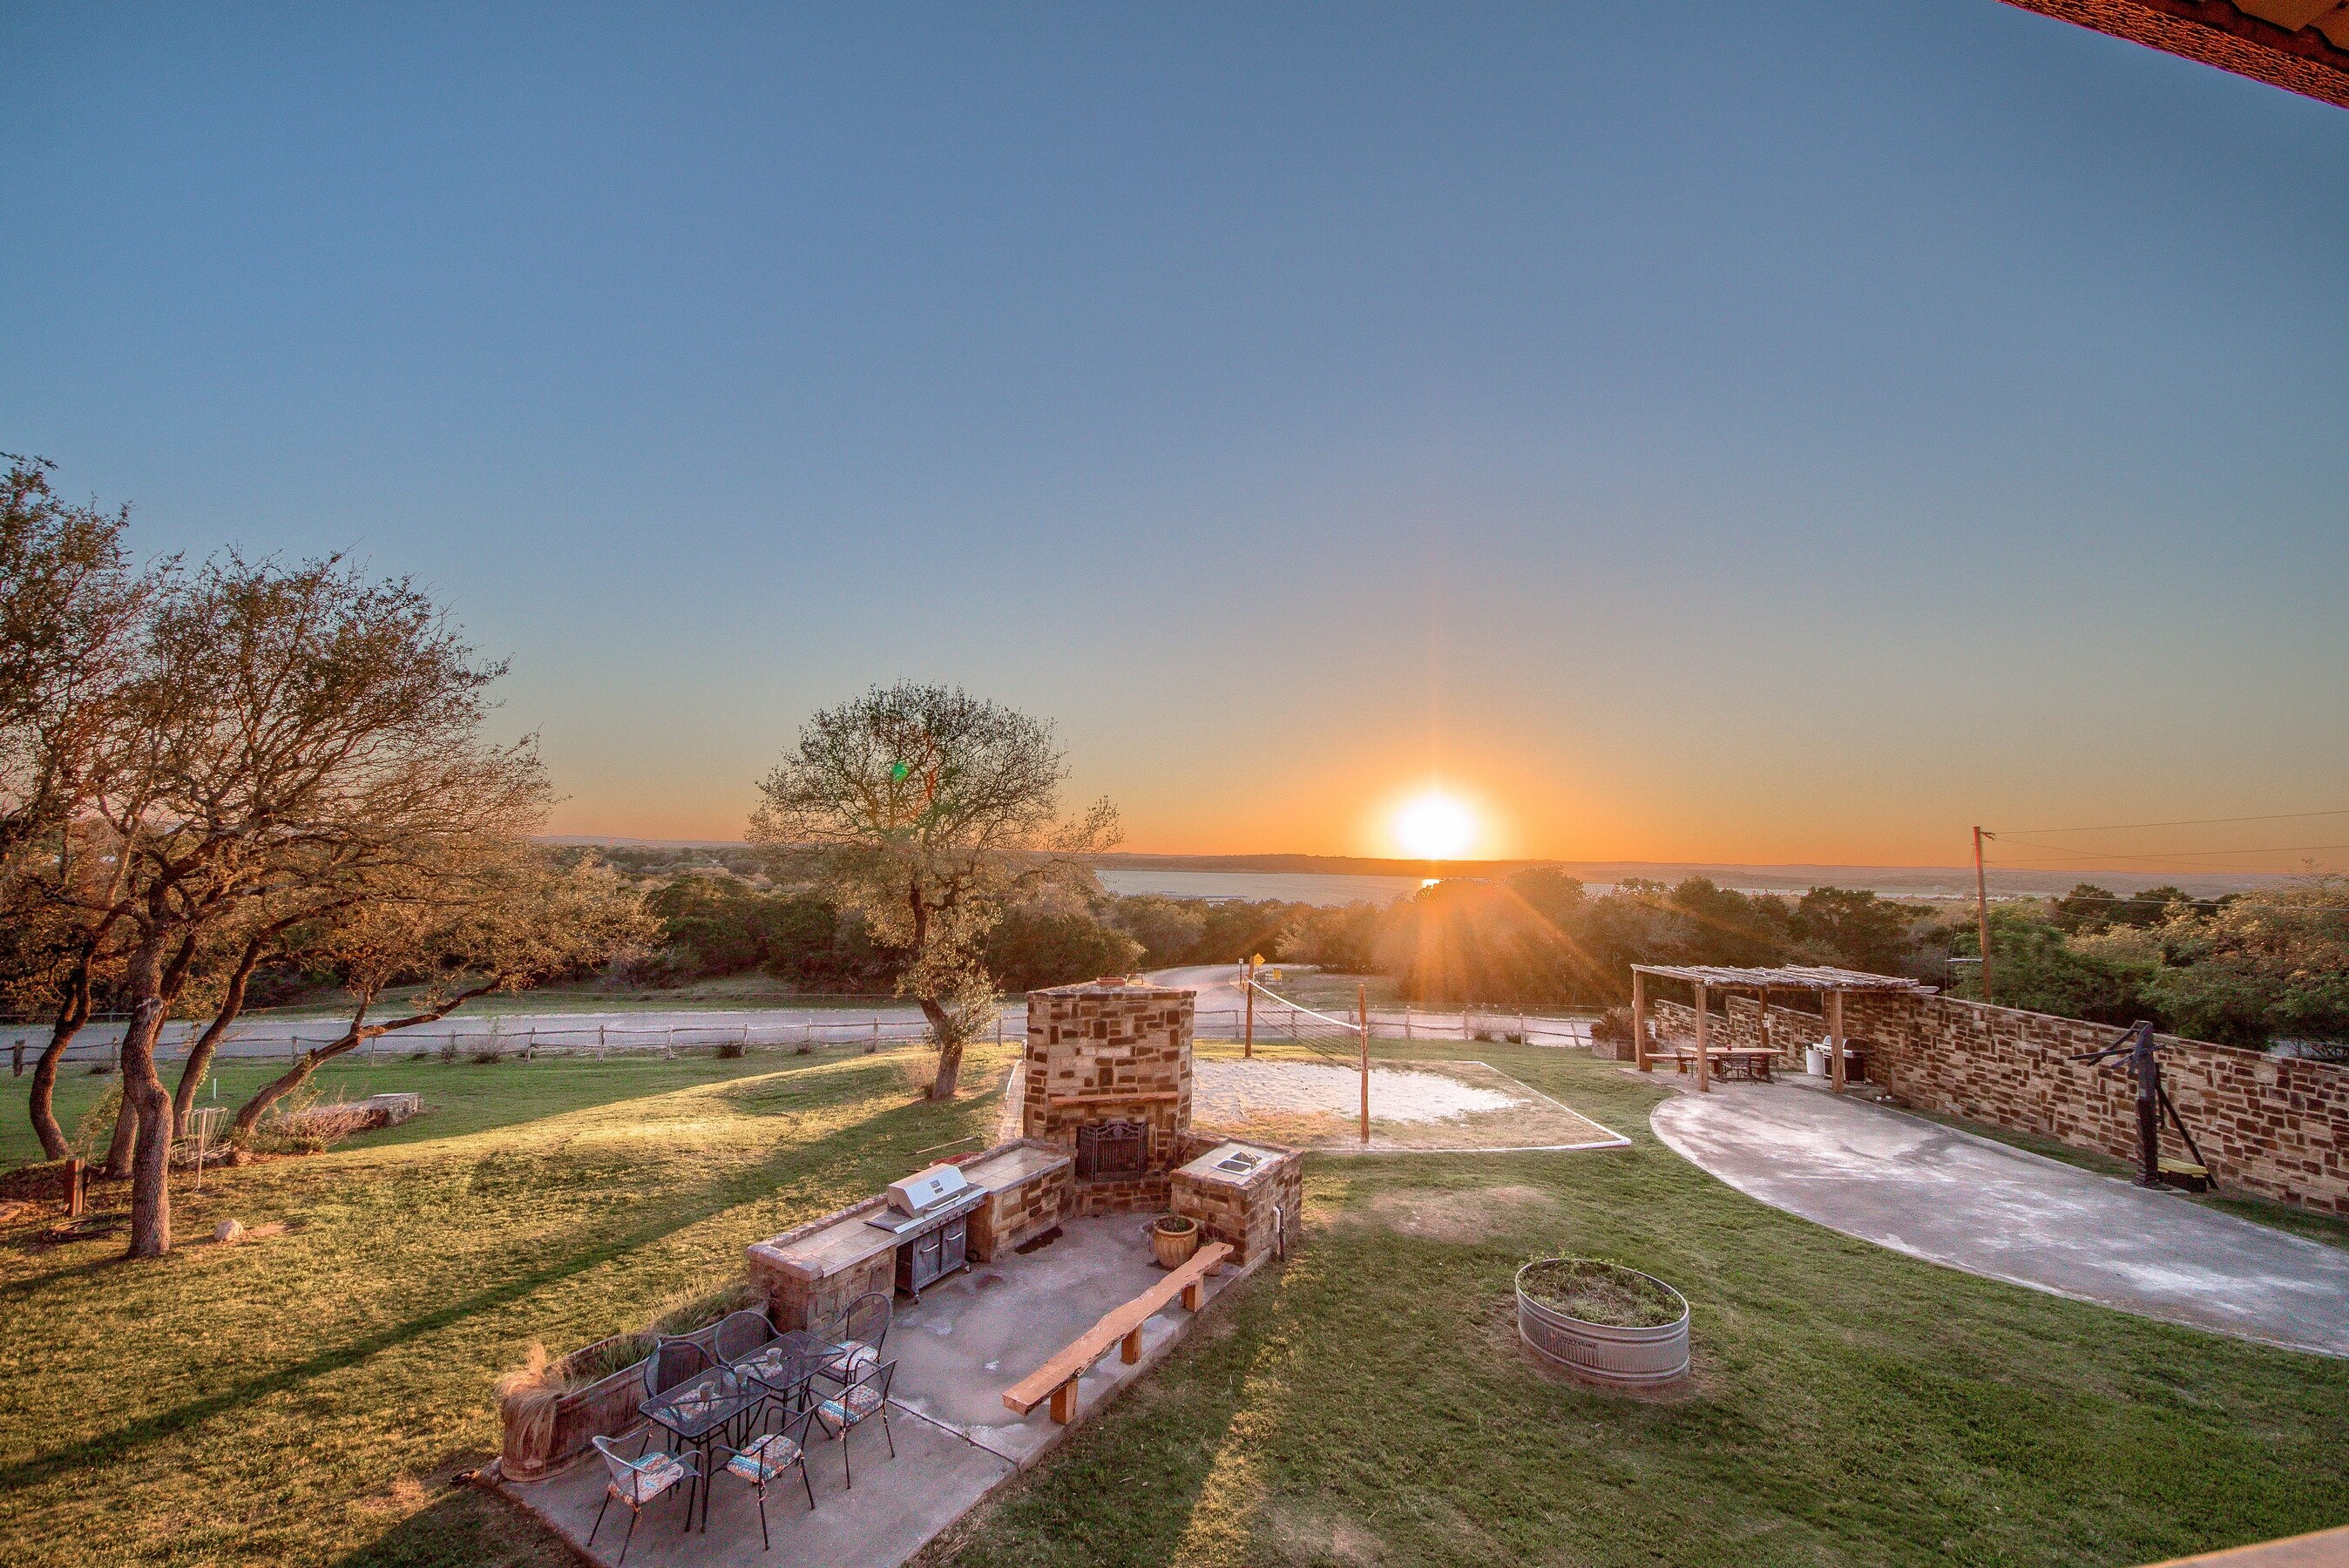 Lakeview has the most amazing views of Canyon lake and the Texas Hill Country!